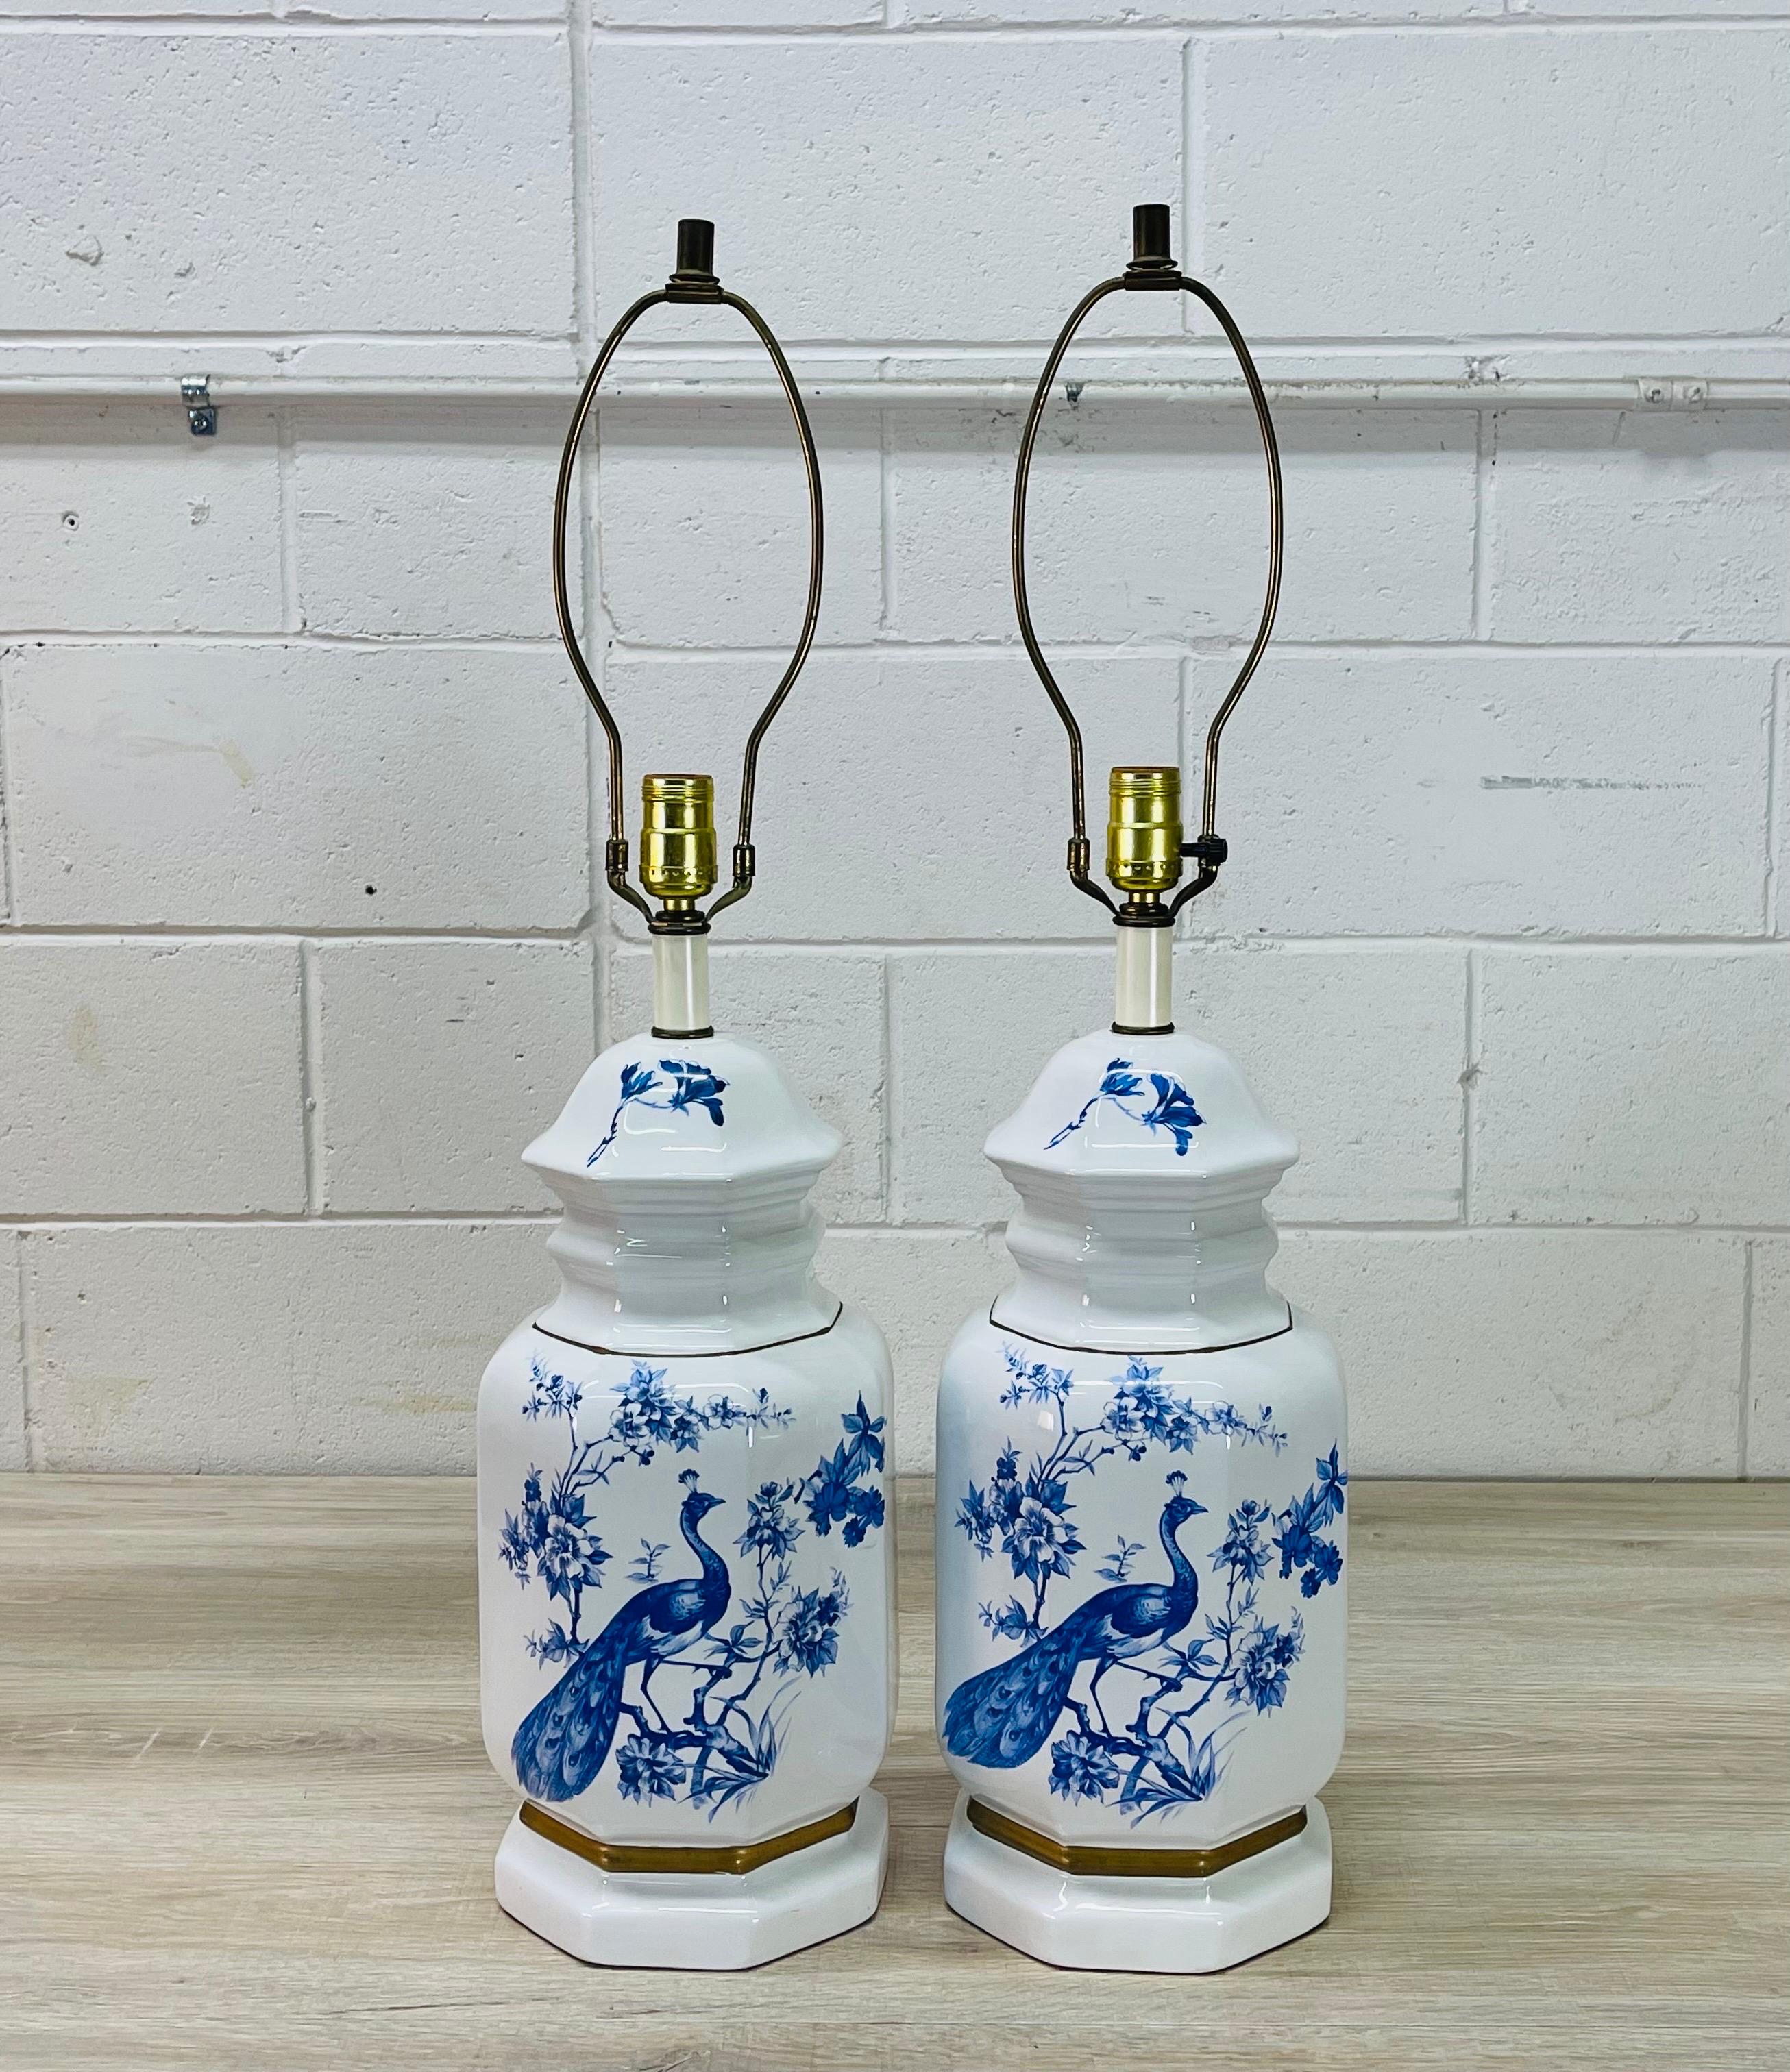 1960s Pair of white and blue peacock ceramic table lamps with a gold accented band. Back of the lamps have a floral design. Wired for the US and in working condition. Socket, measures: 21” height Harp, 5” diameter x 9.5”height. Uses a standard 100W